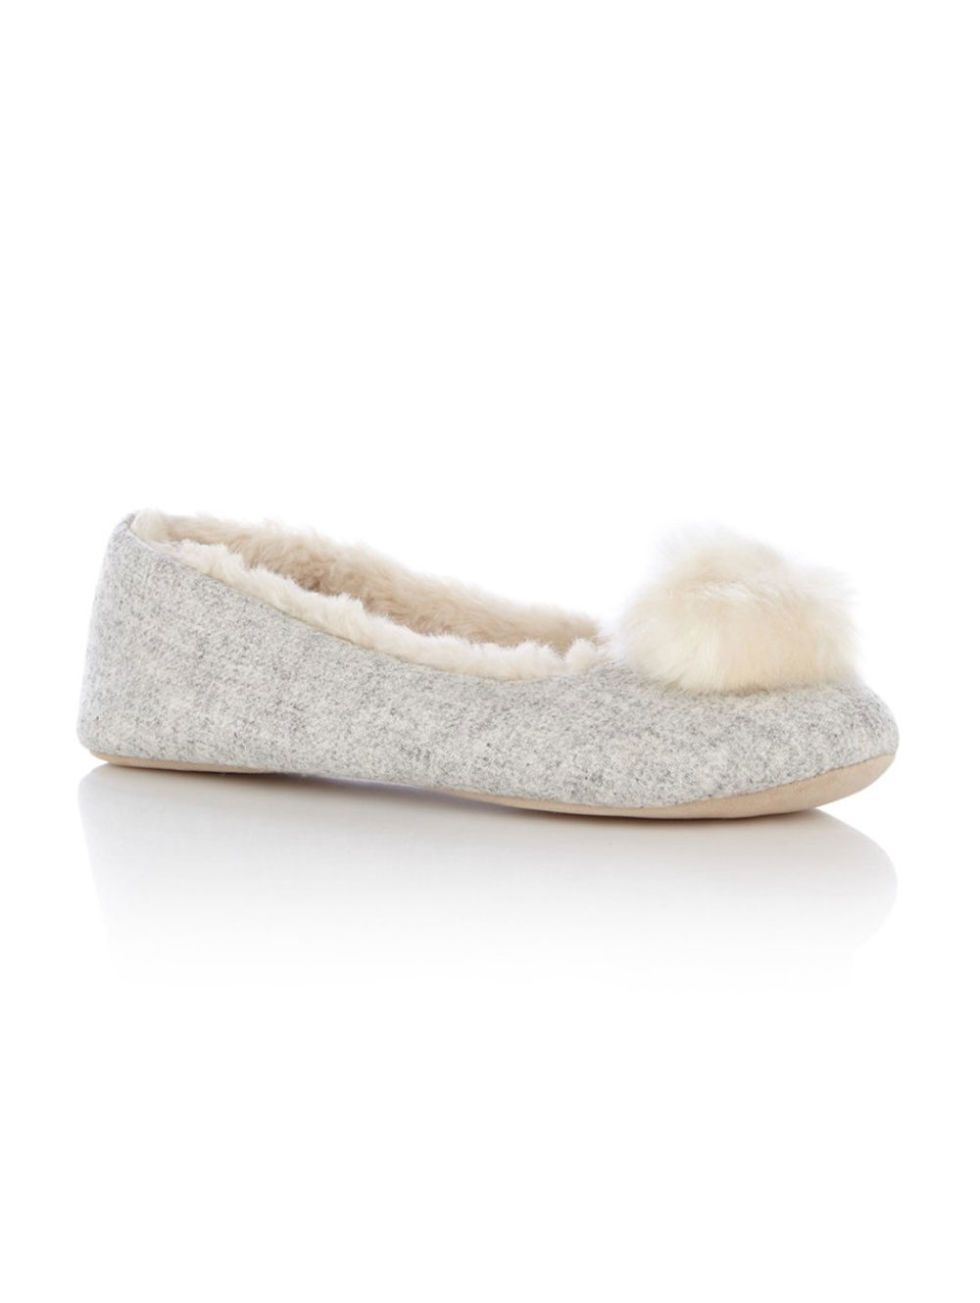 White, Tan, Grey, Beige, Ivory, Natural material, Fawn, Slipper, 